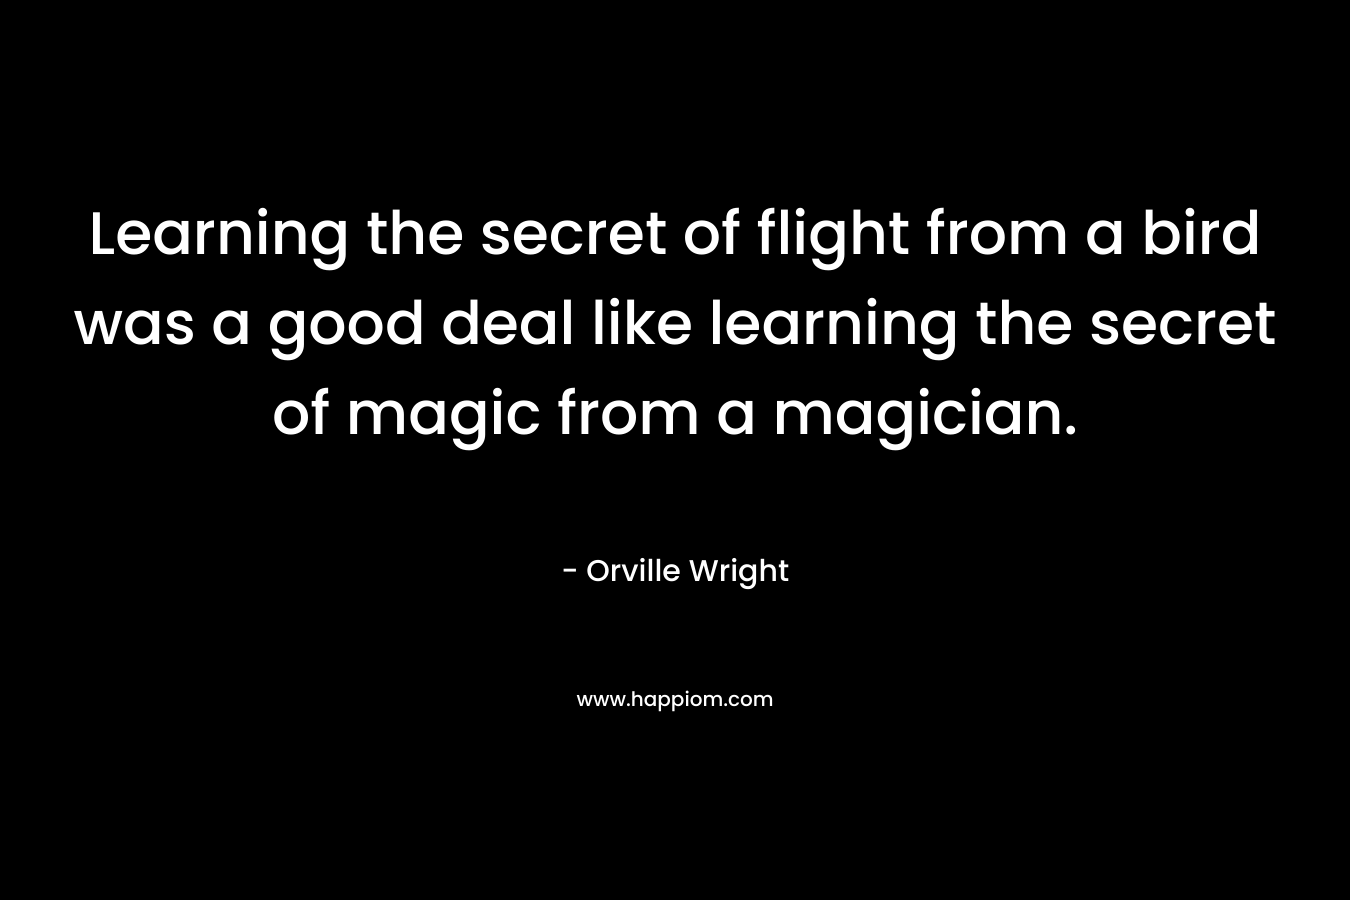 Learning the secret of flight from a bird was a good deal like learning the secret of magic from a magician.